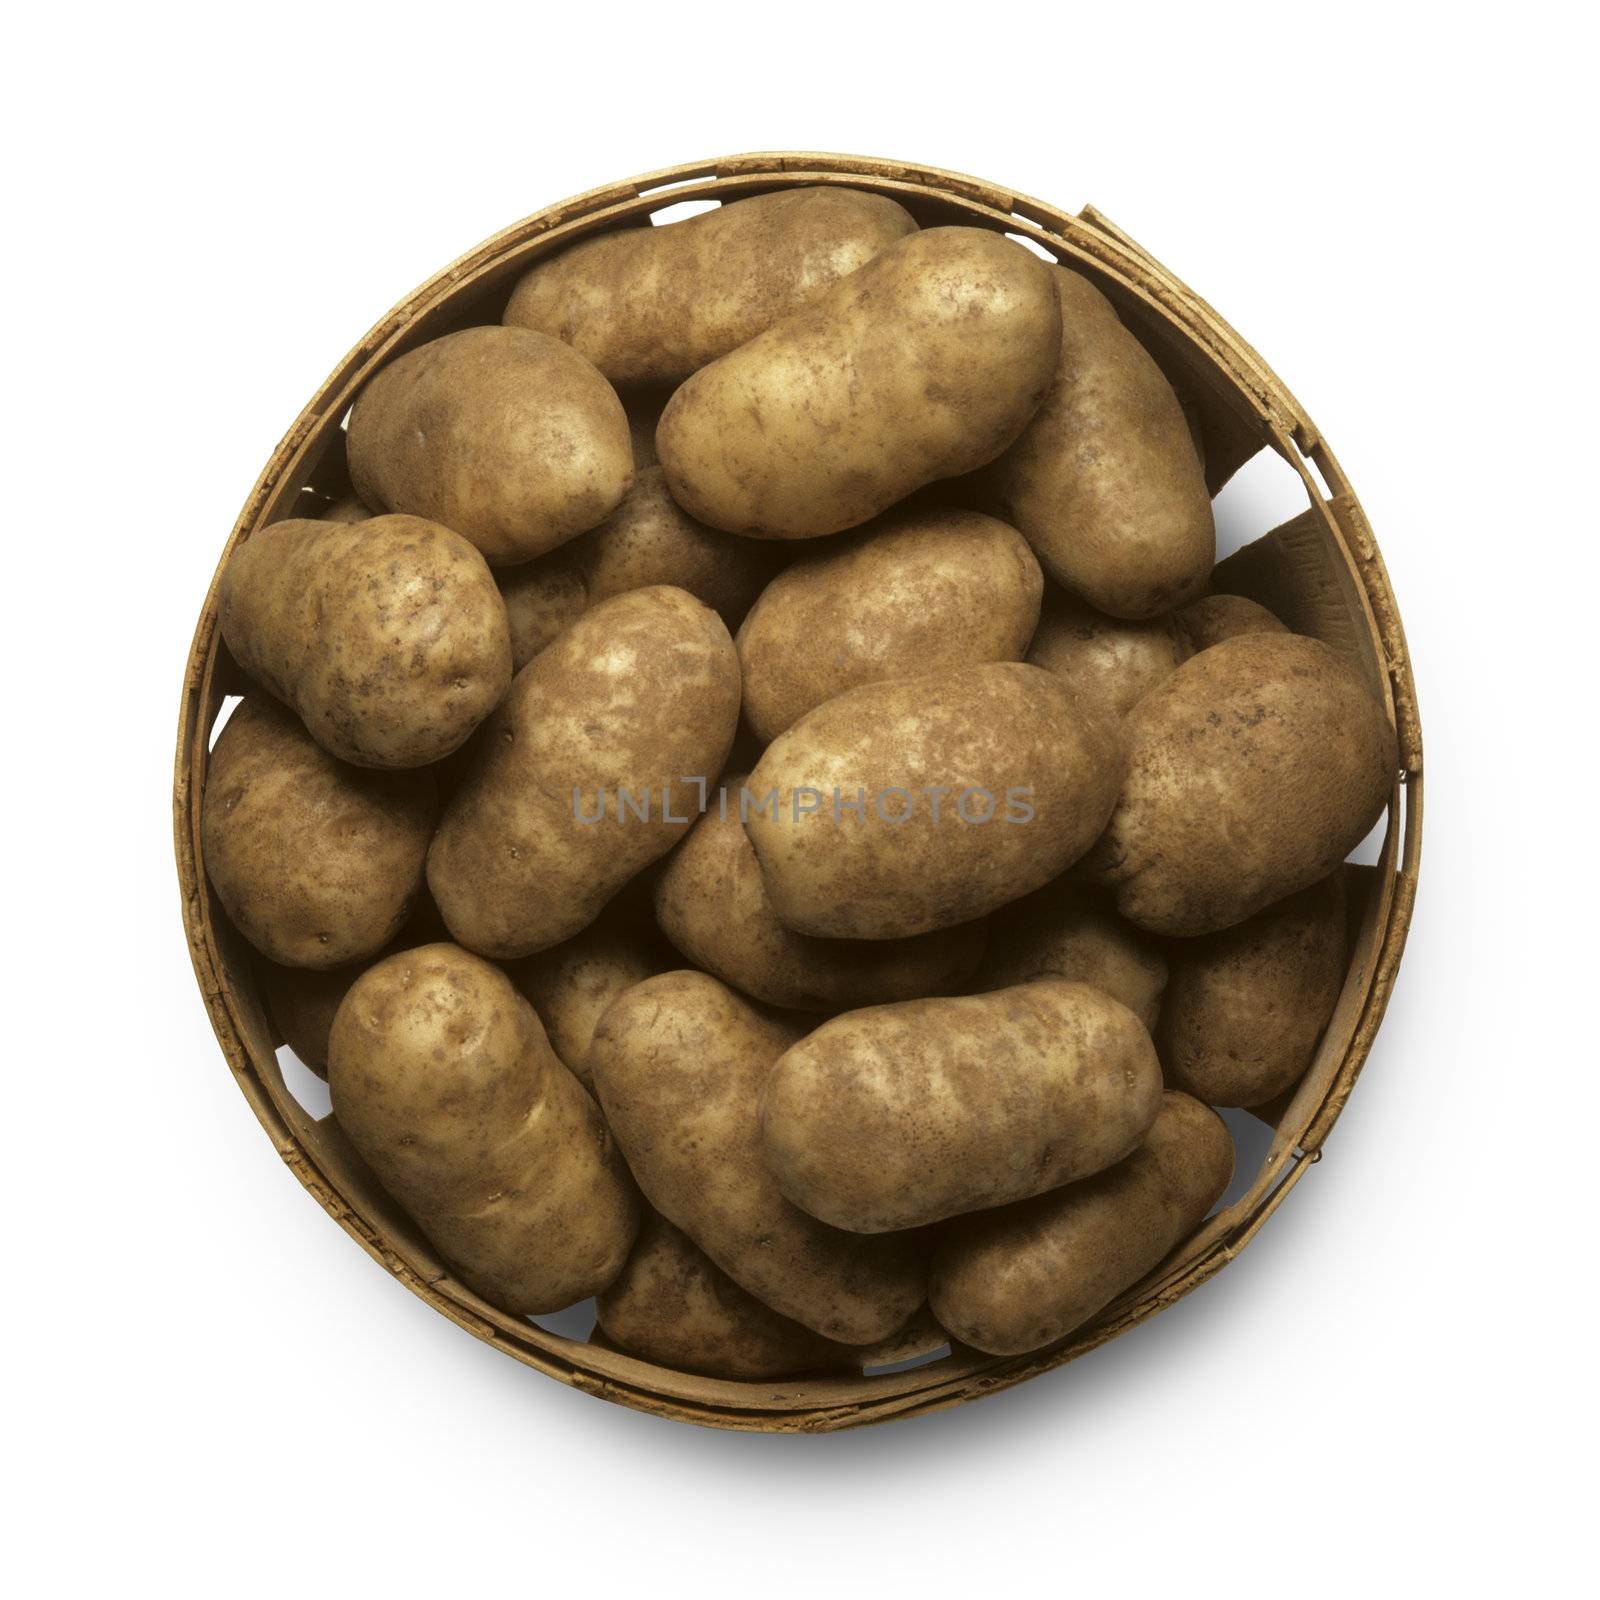 Basket of potatoes against white background